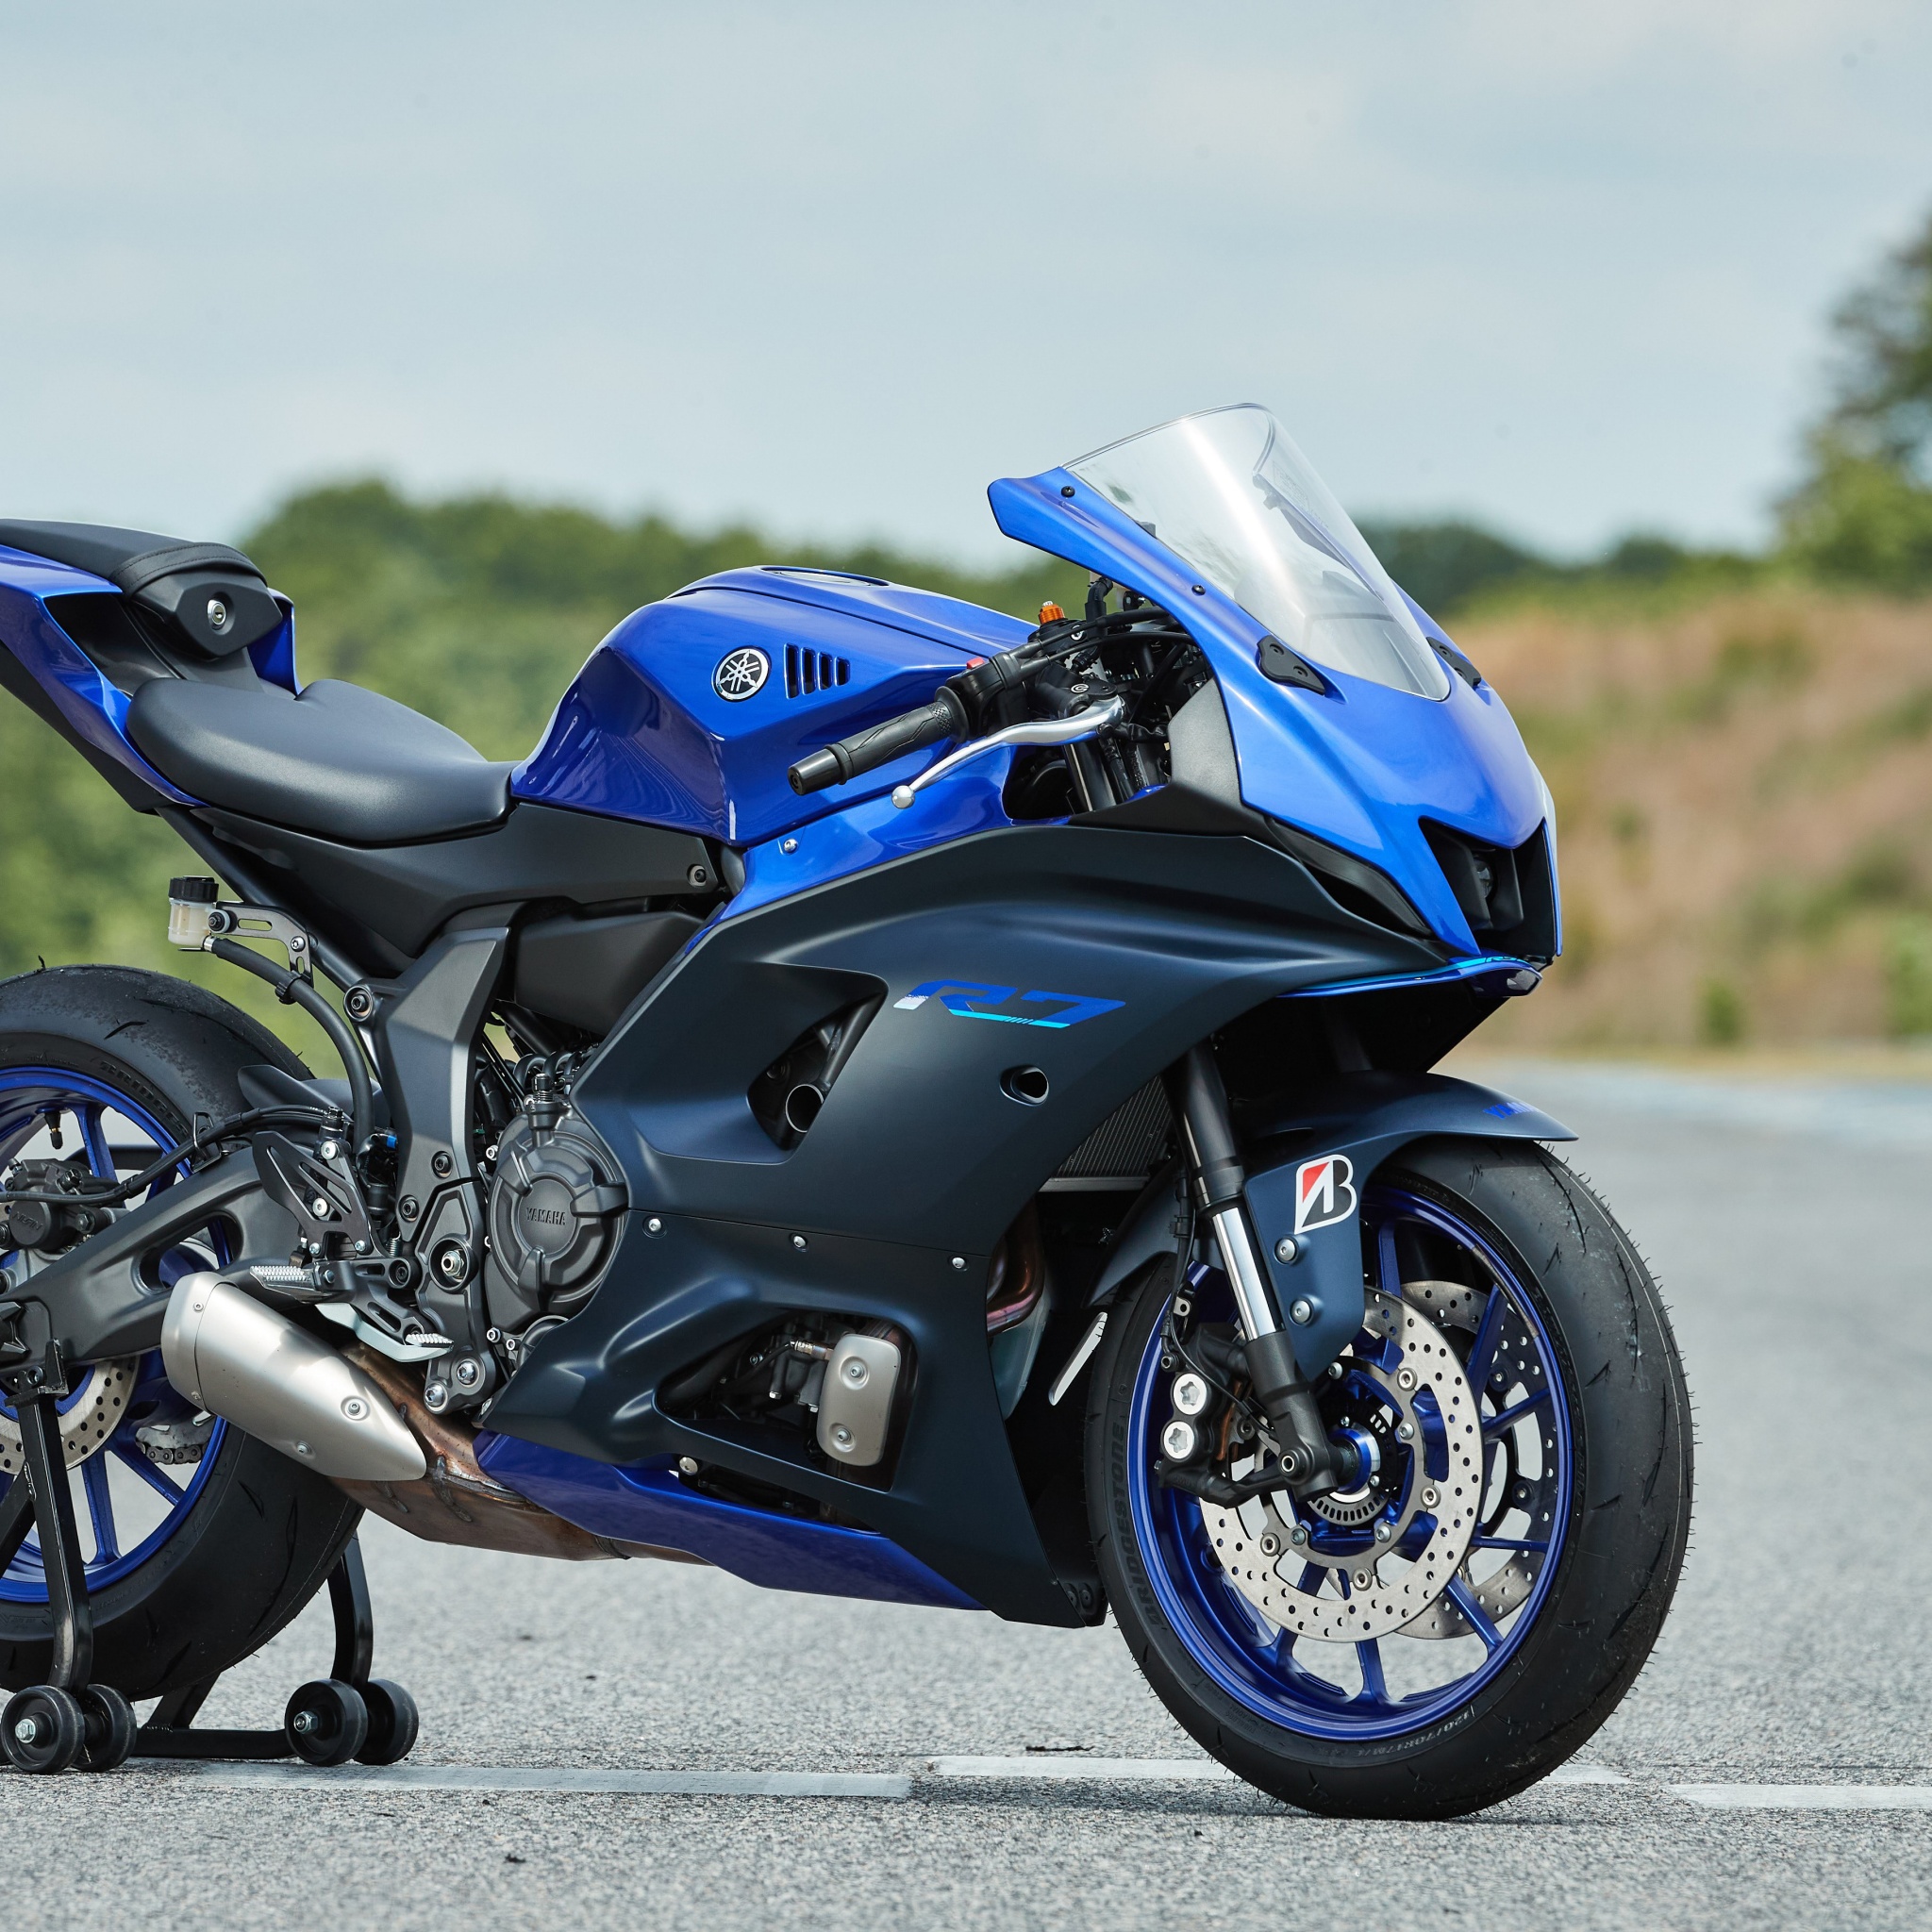 Yamaha YZF-R7 In Action Wallpapers